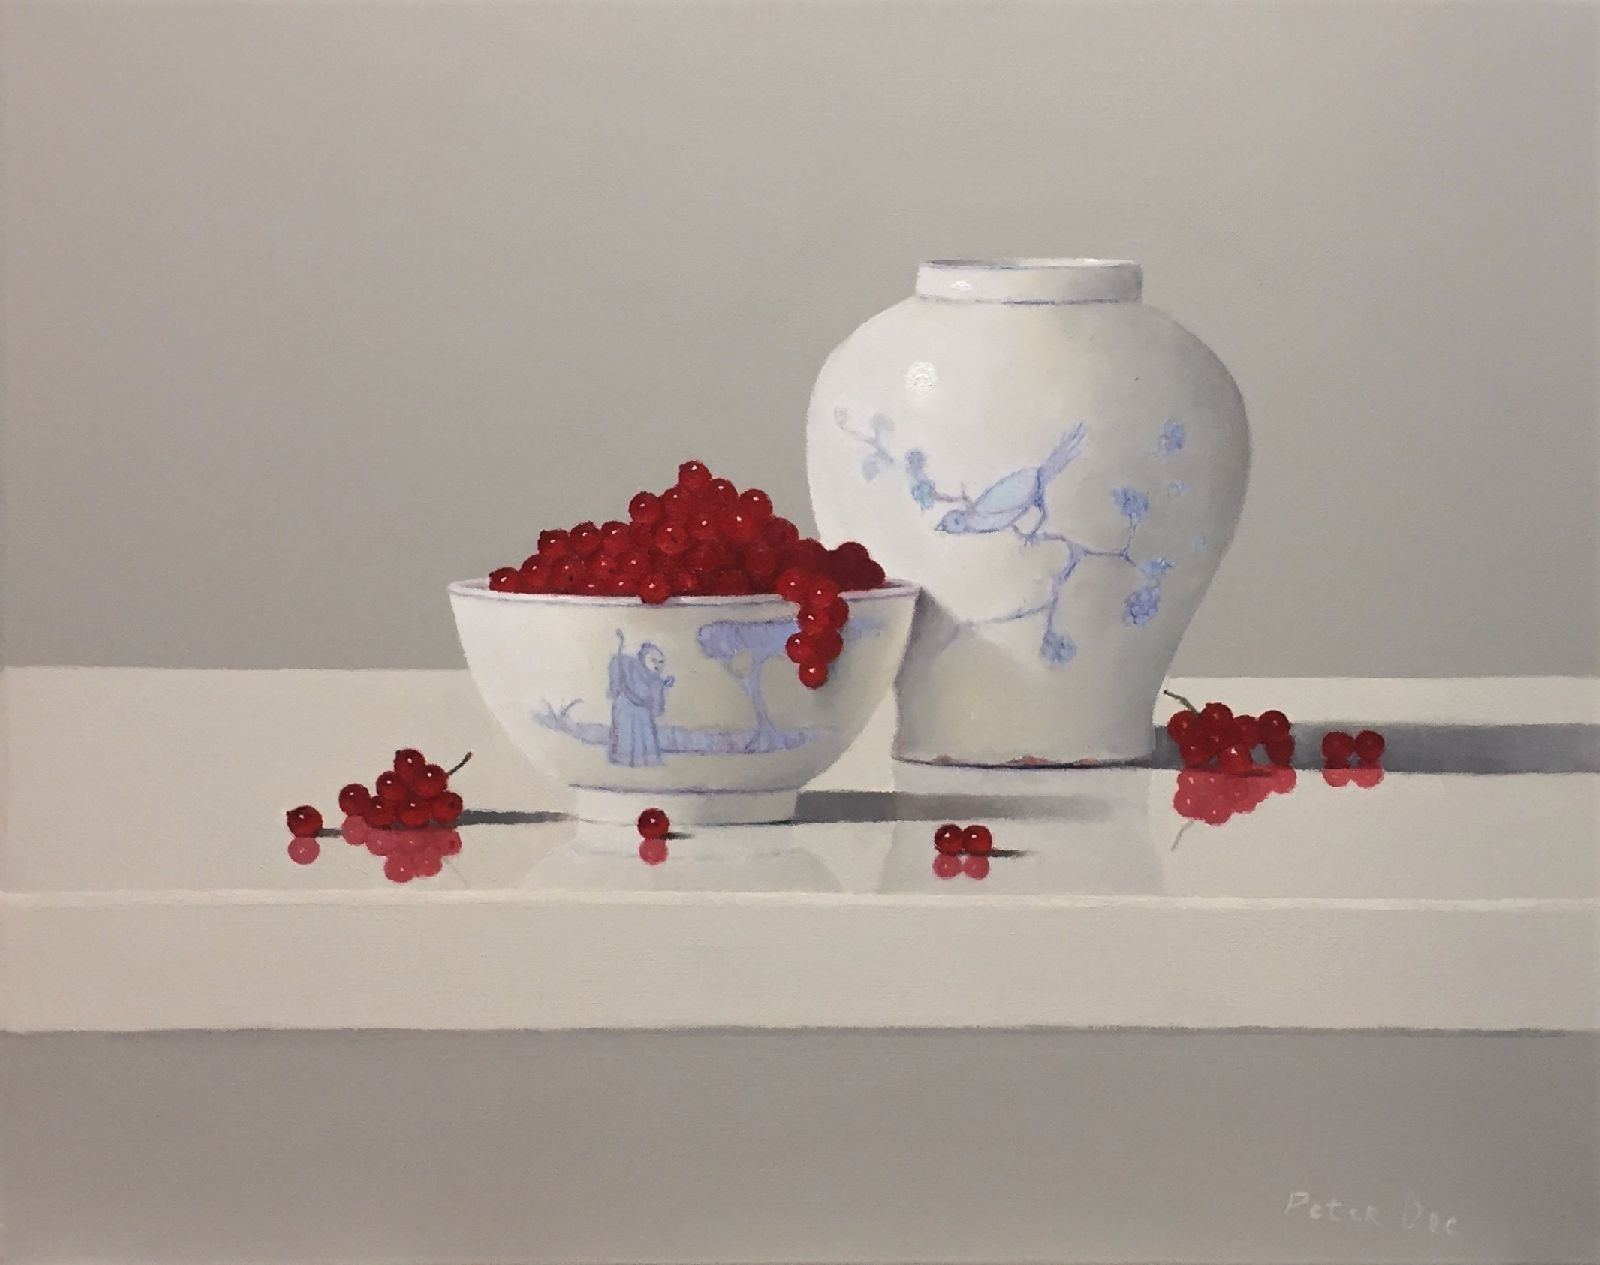 Peter Dee - Oriental Still Life with Redcurrants